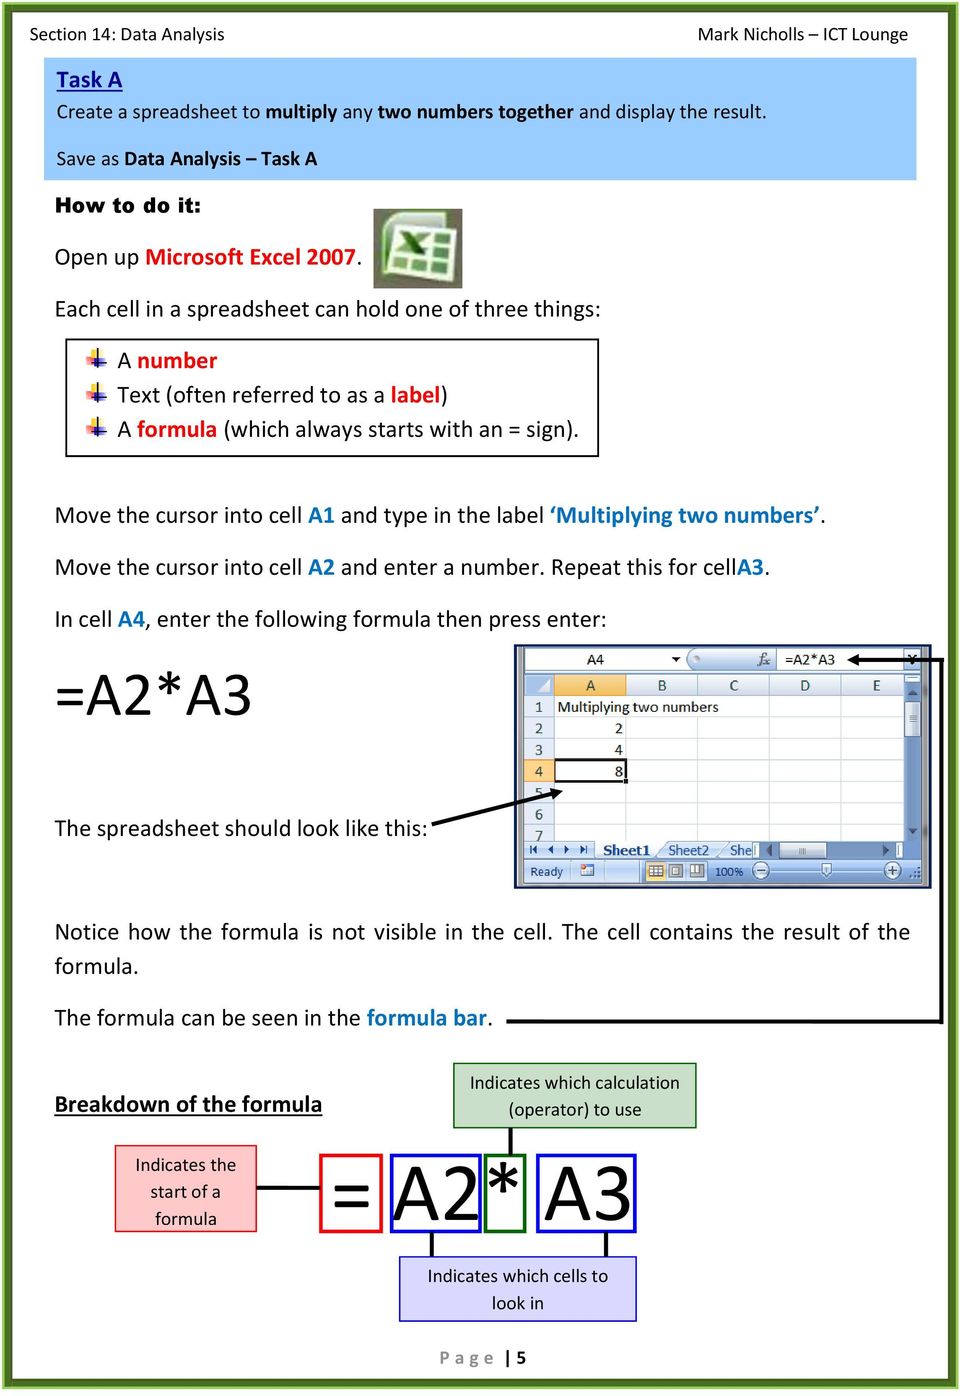 Move the cursor into cell A1 and type in the label Multiplying two numbers. Move the cursor into cell A2 and enter a number. Repeat this for cella3.